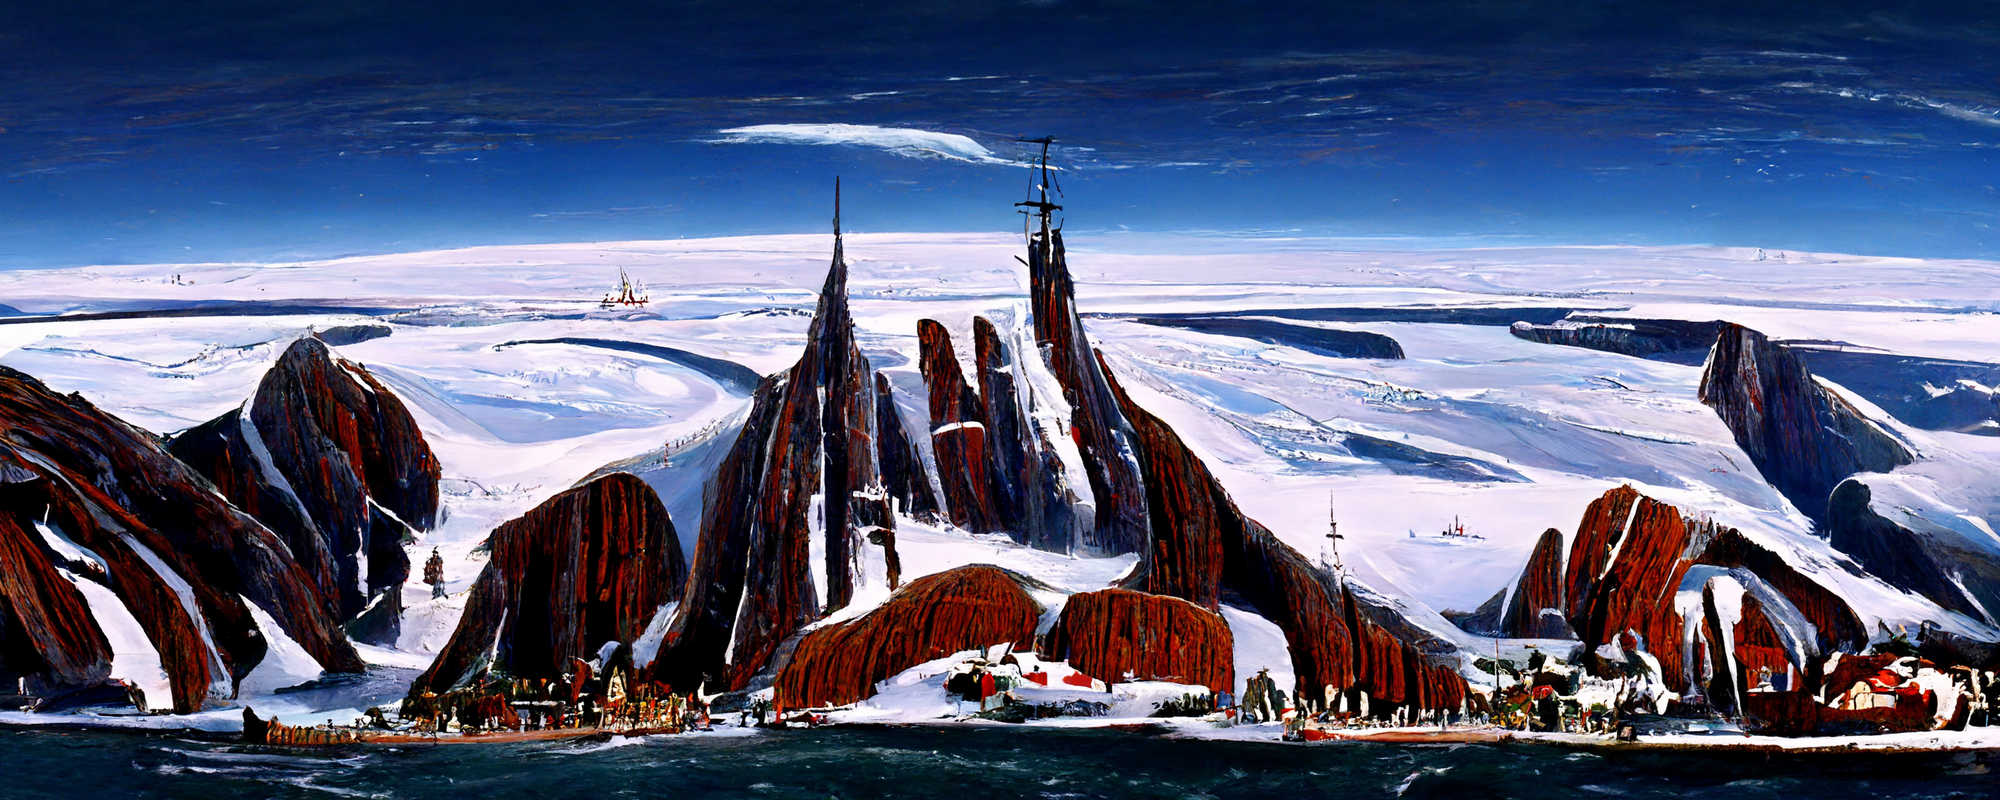 An icy plateau on the edge of a blue-green sea. Beneath the ice sheet and along the coast are deep red rock formations.